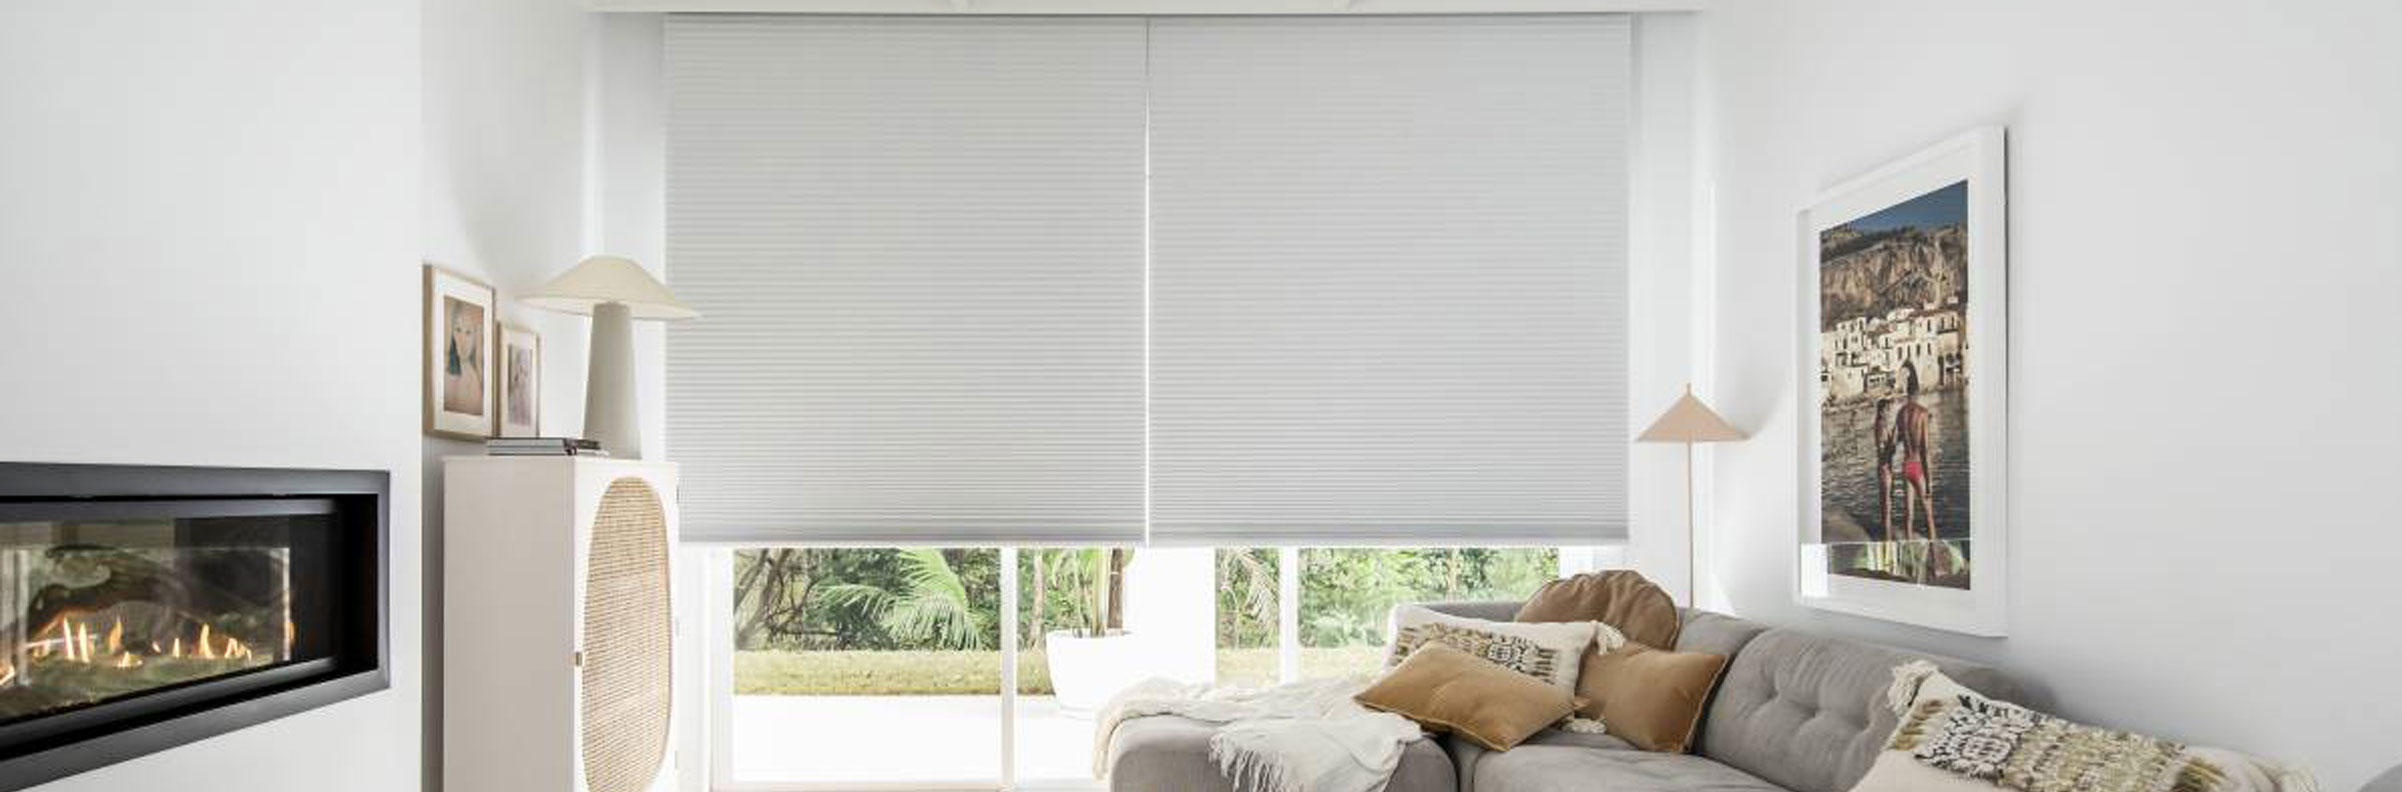 Honeycomb blinds in lounge